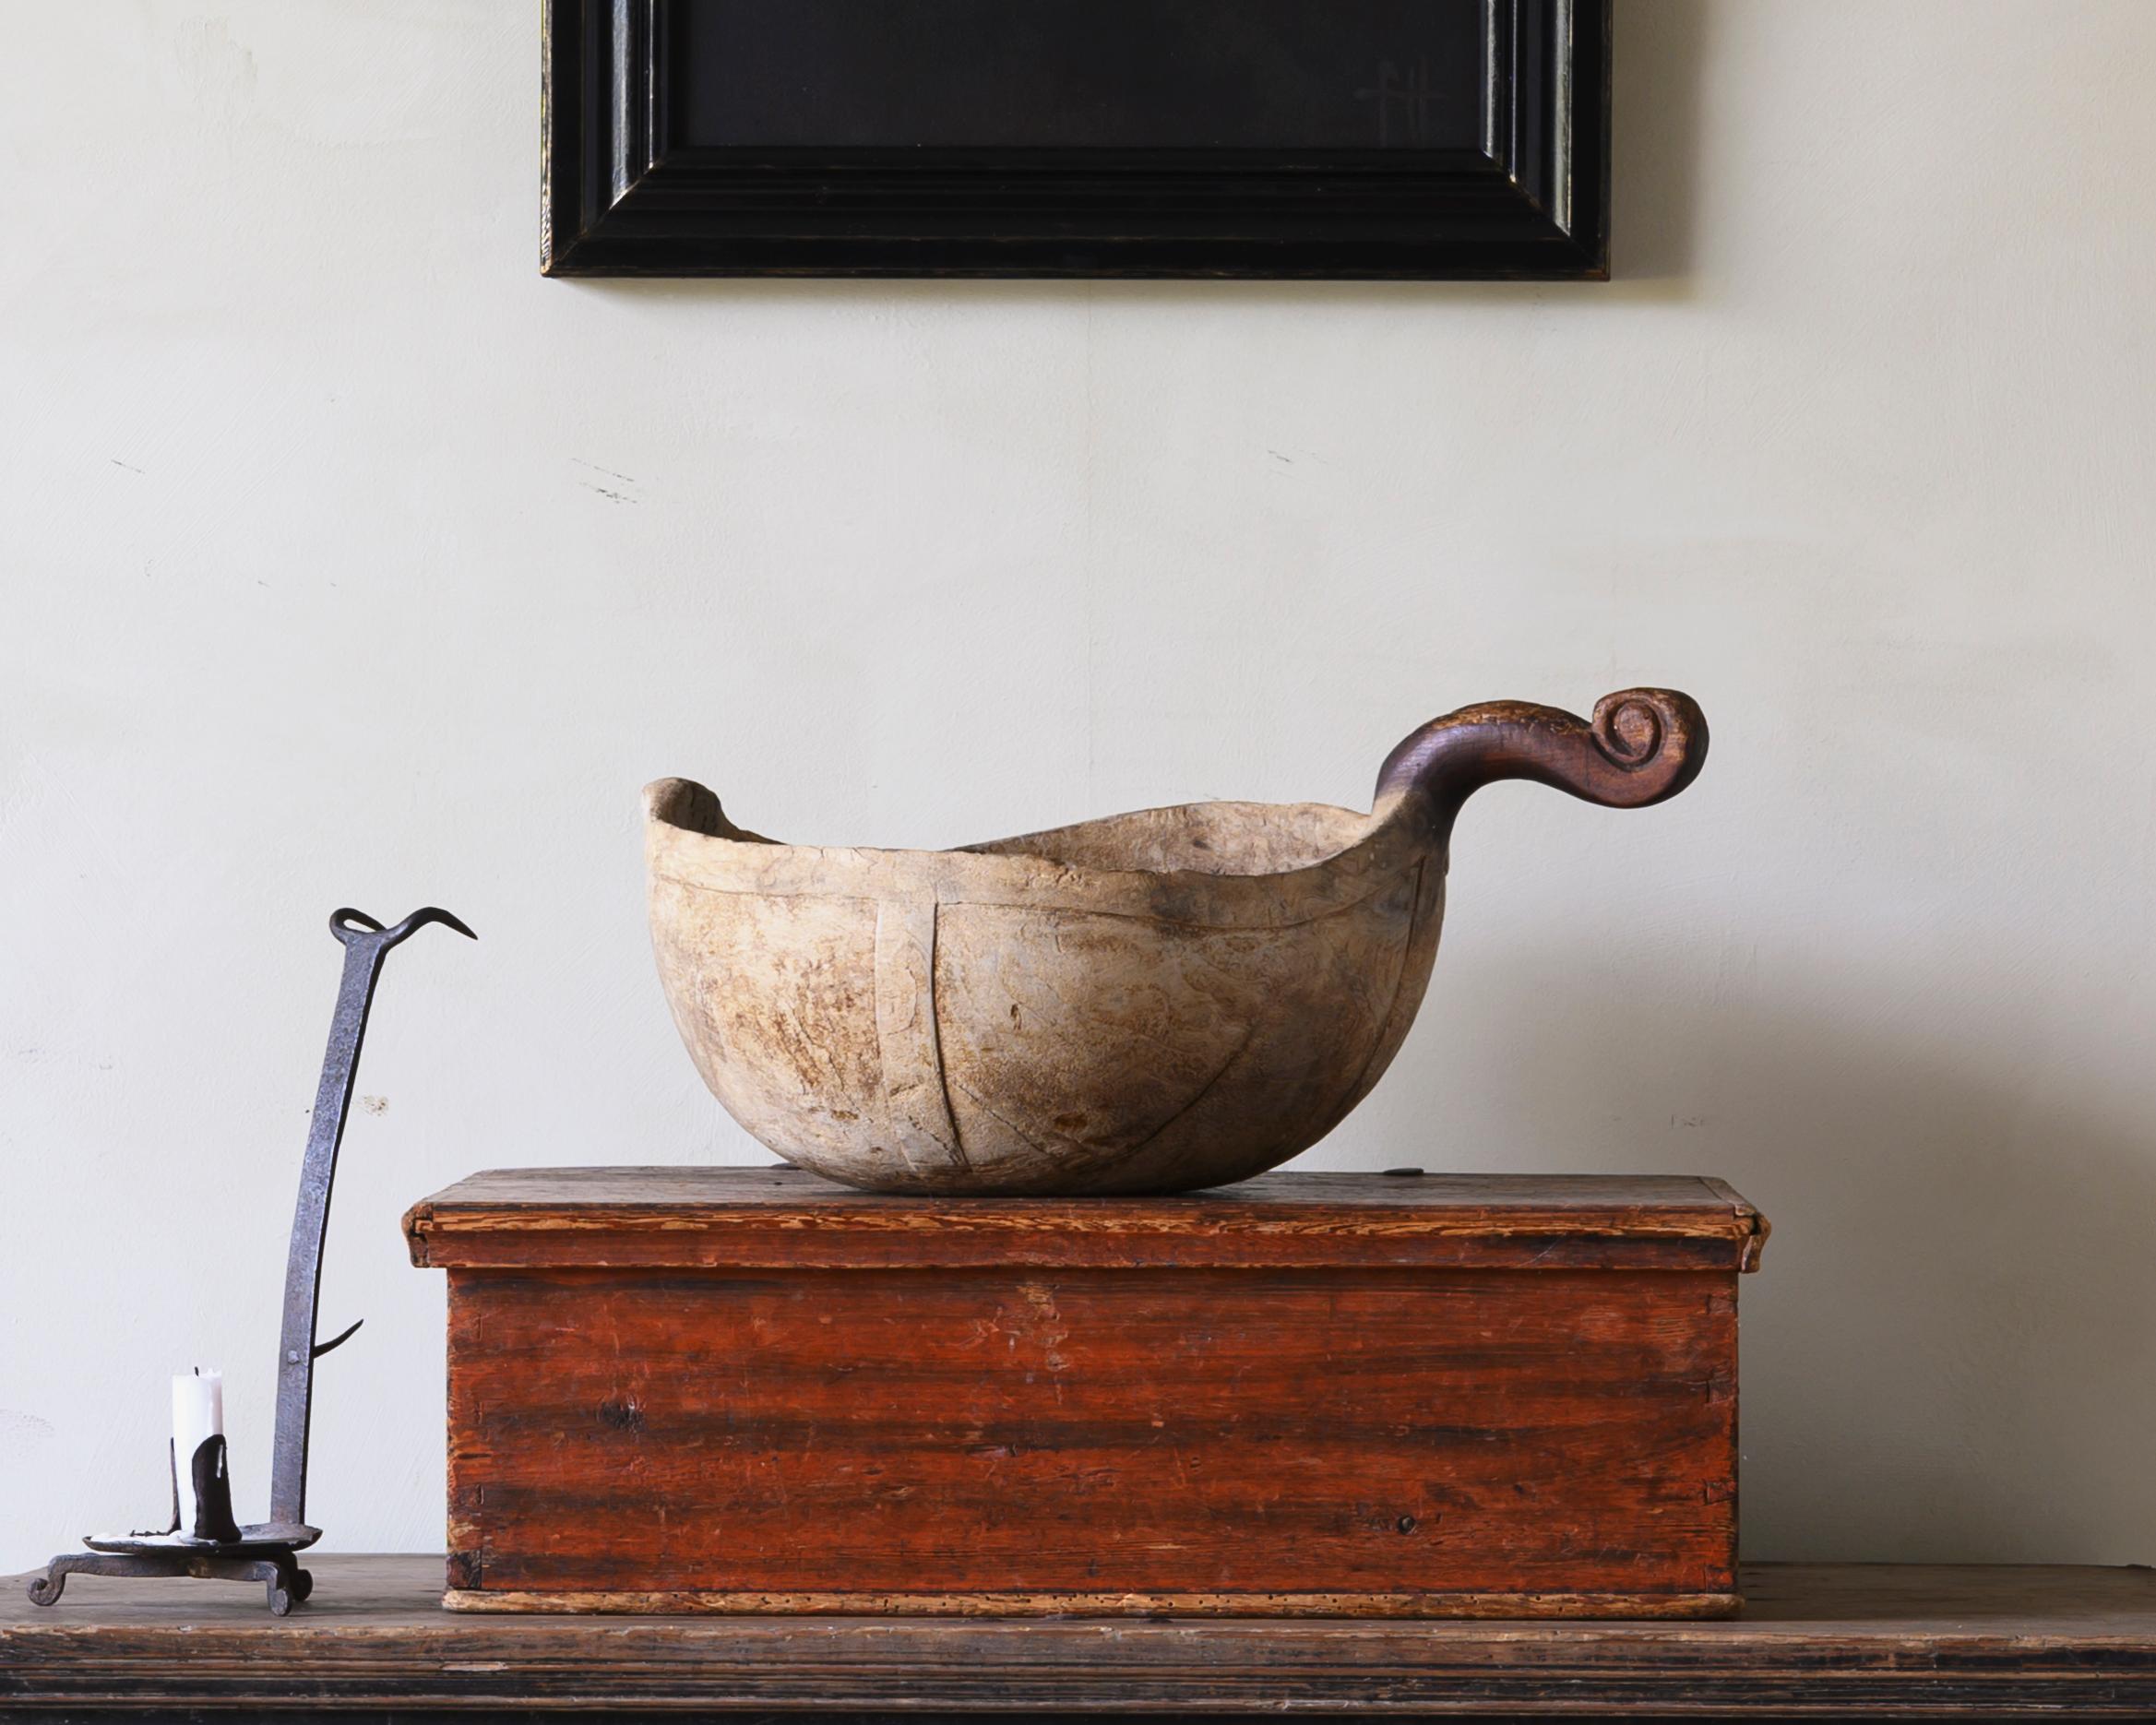 Exceptional early 18th century bowl / ale scoop with unusual figured handle, ca 1720 Sweden.